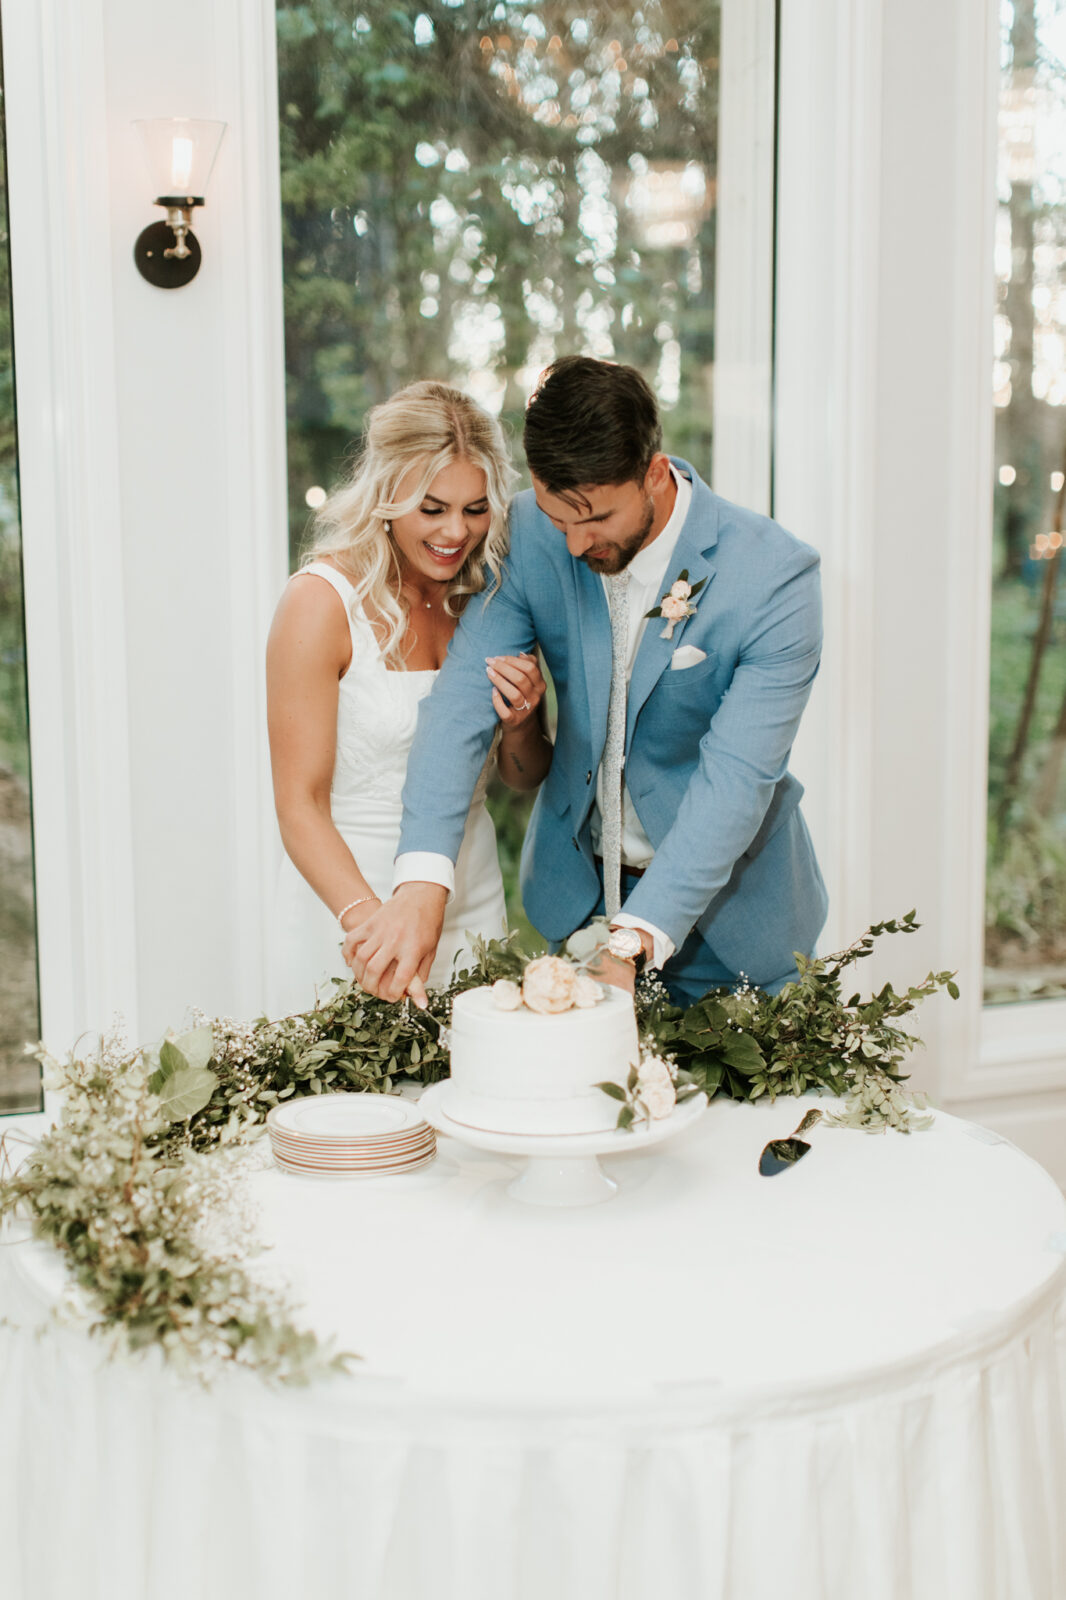 baby blue wedding, vintage meets classic wedding inspiration, summer wedding inspiration, cake cutting
